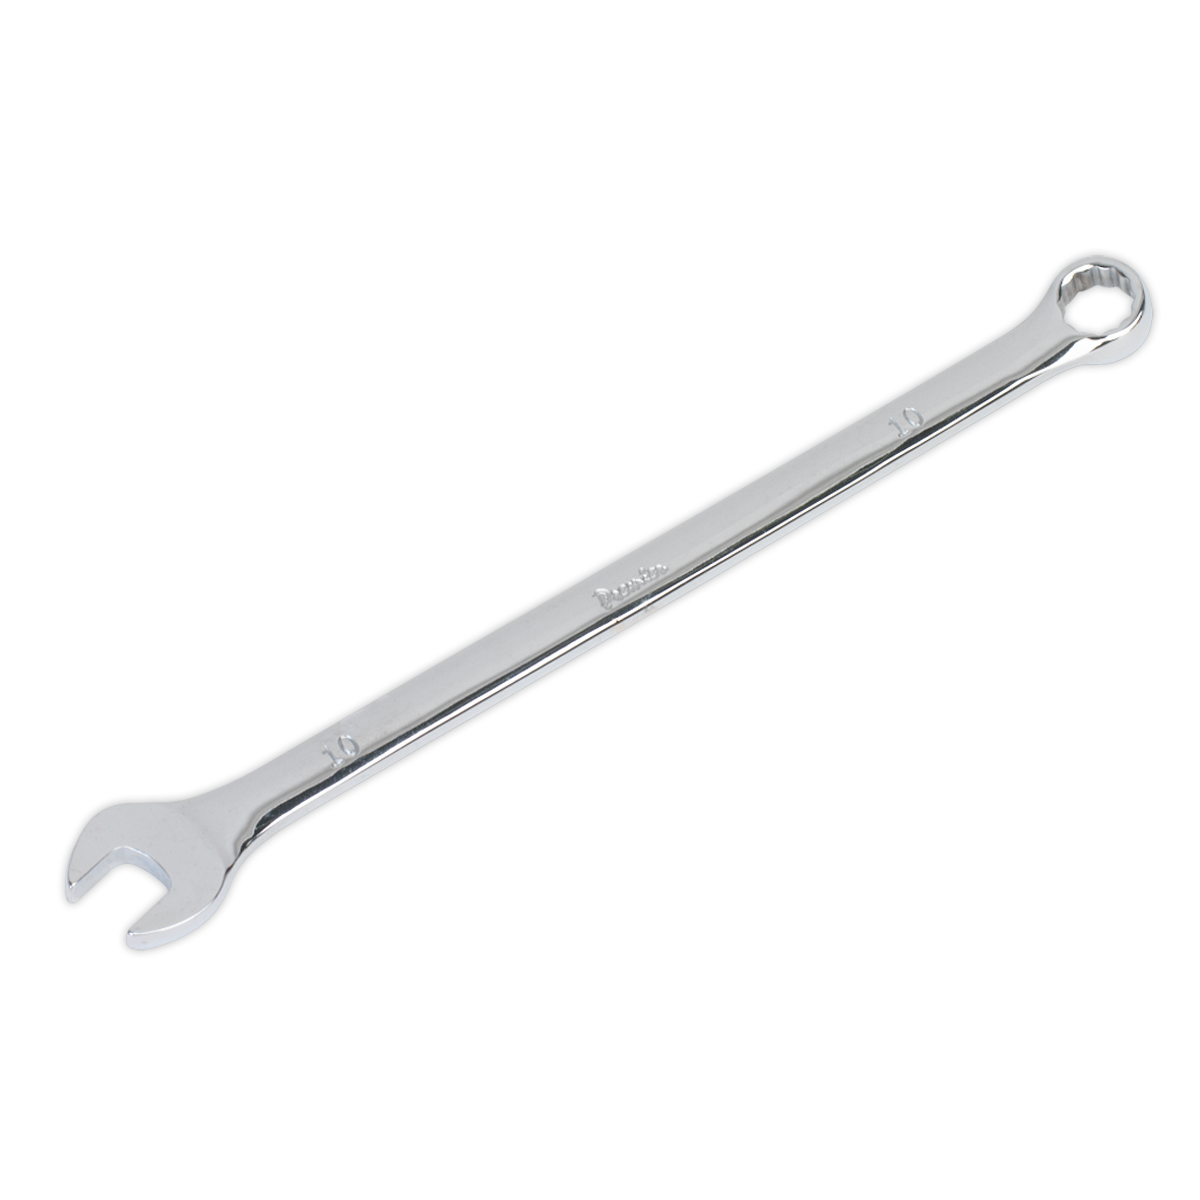 SEALEY - AK631010 Combination Spanner Extra-Long 10mm